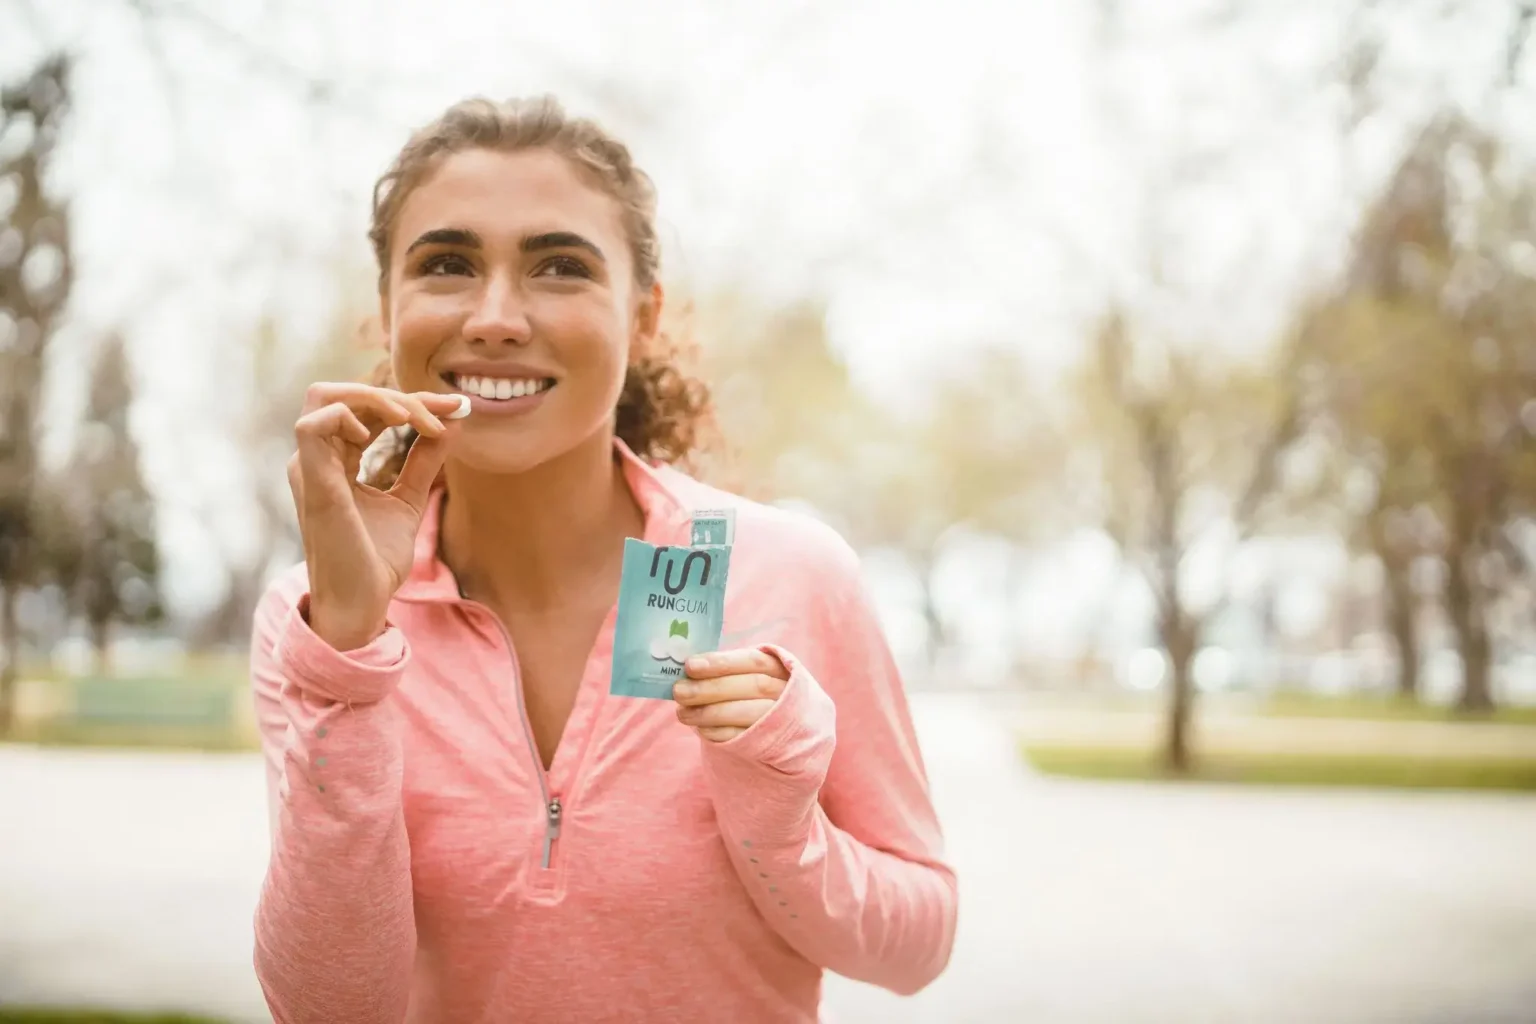 Chewing gum for runners is a popular practice